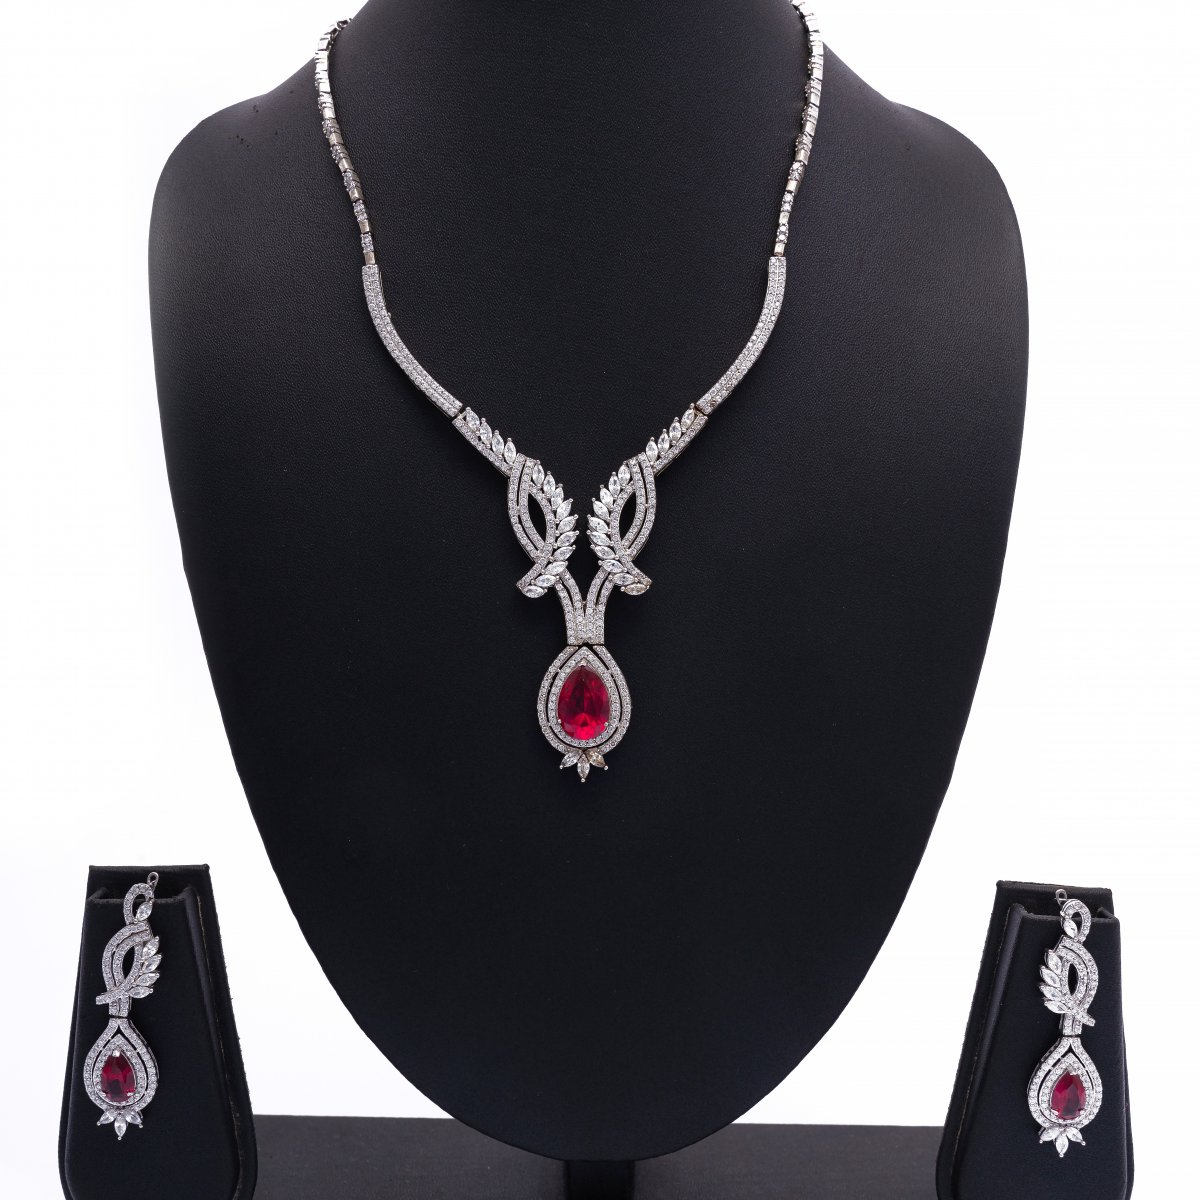 SOUTH INDIAN TRADITIONAL NECKLACE JEWELLERY SET COMBO FOR WOMEN 